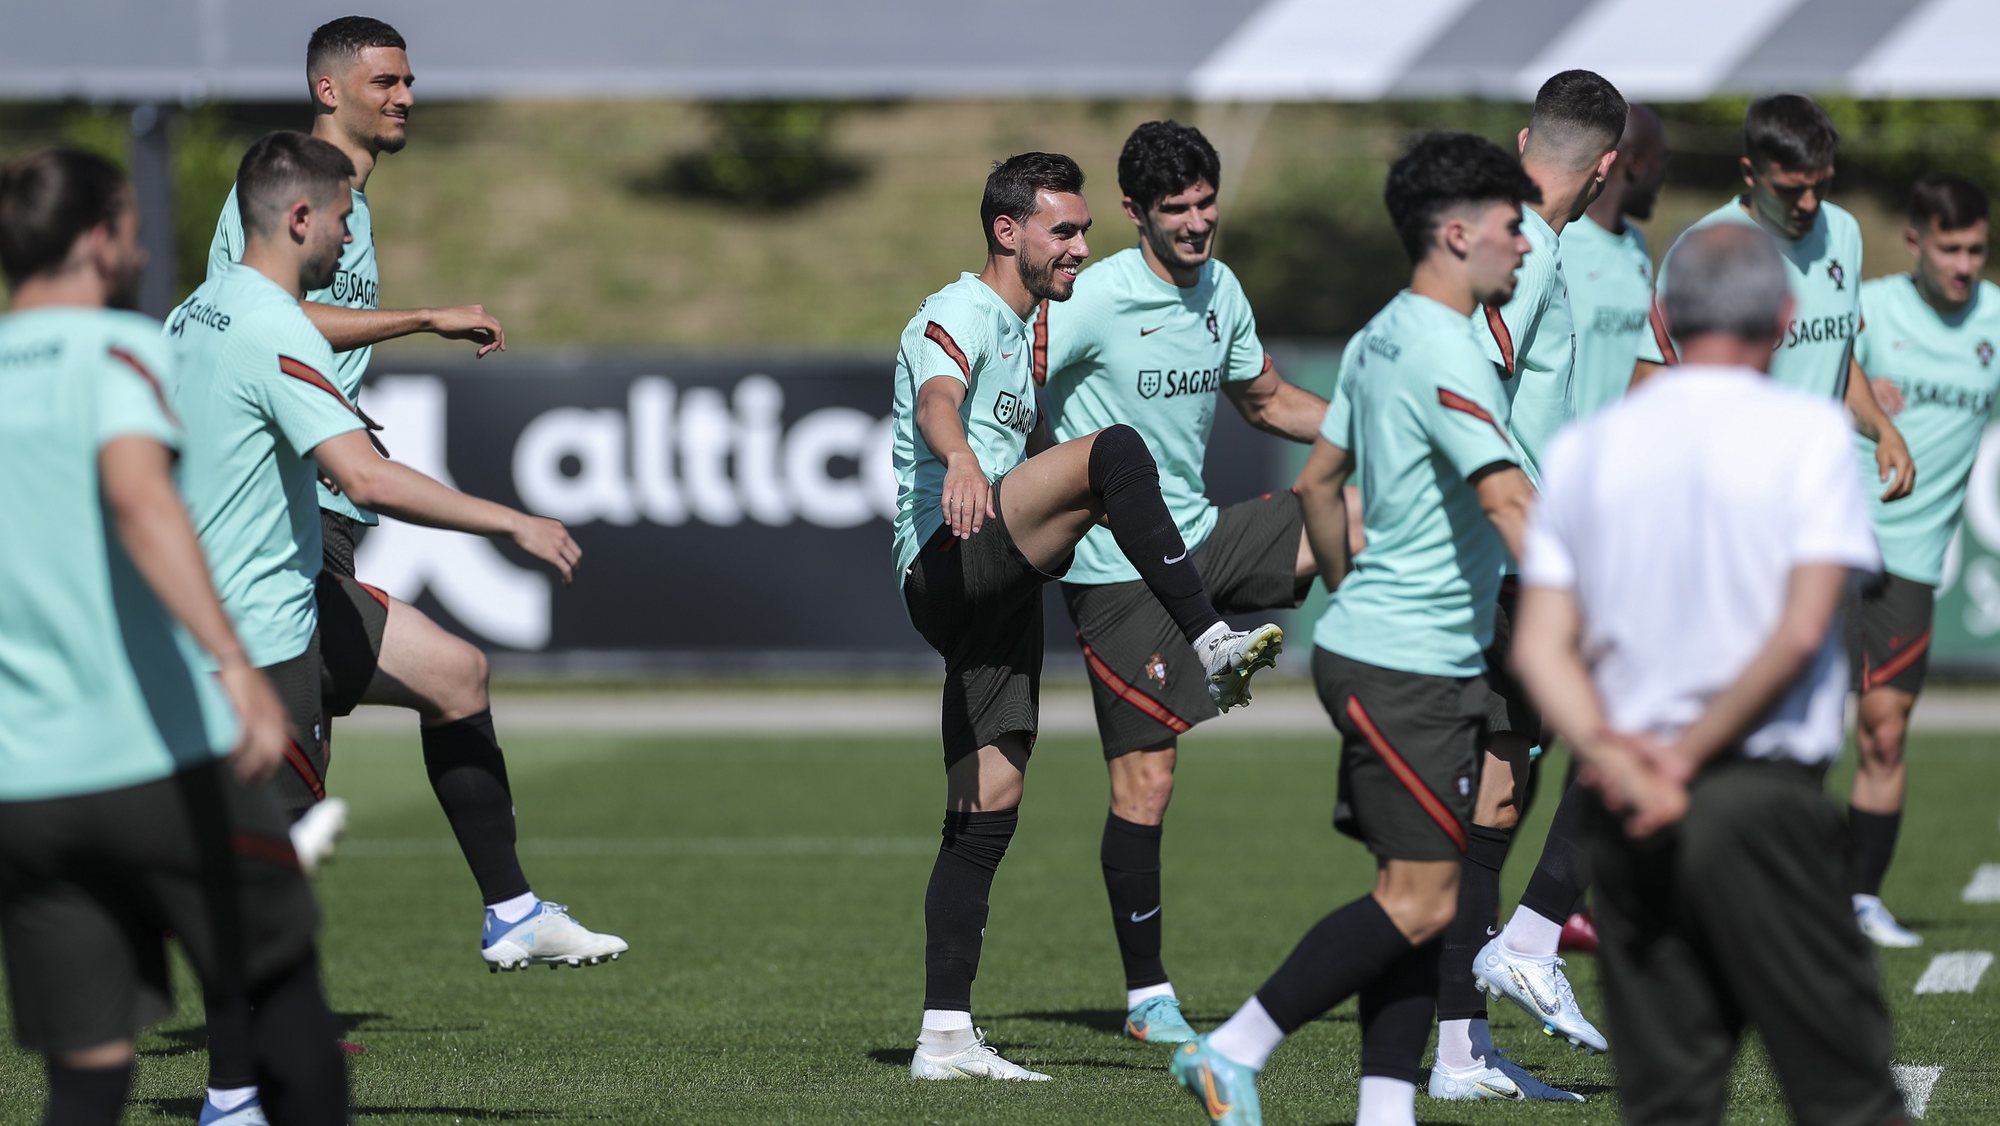 Portugal soccer team players André Horta (C), Gonçalo Guedes (C-R) and others during the training session at Cidade do Futebol in Oeiras in the outskirts of Lisbon. 26 of May 2022. Portugal will play against, Spain, Check Republic and Switzerland for the upcoming UEFA Nations League in June.  MIGUEL A. LOPES/LUSA